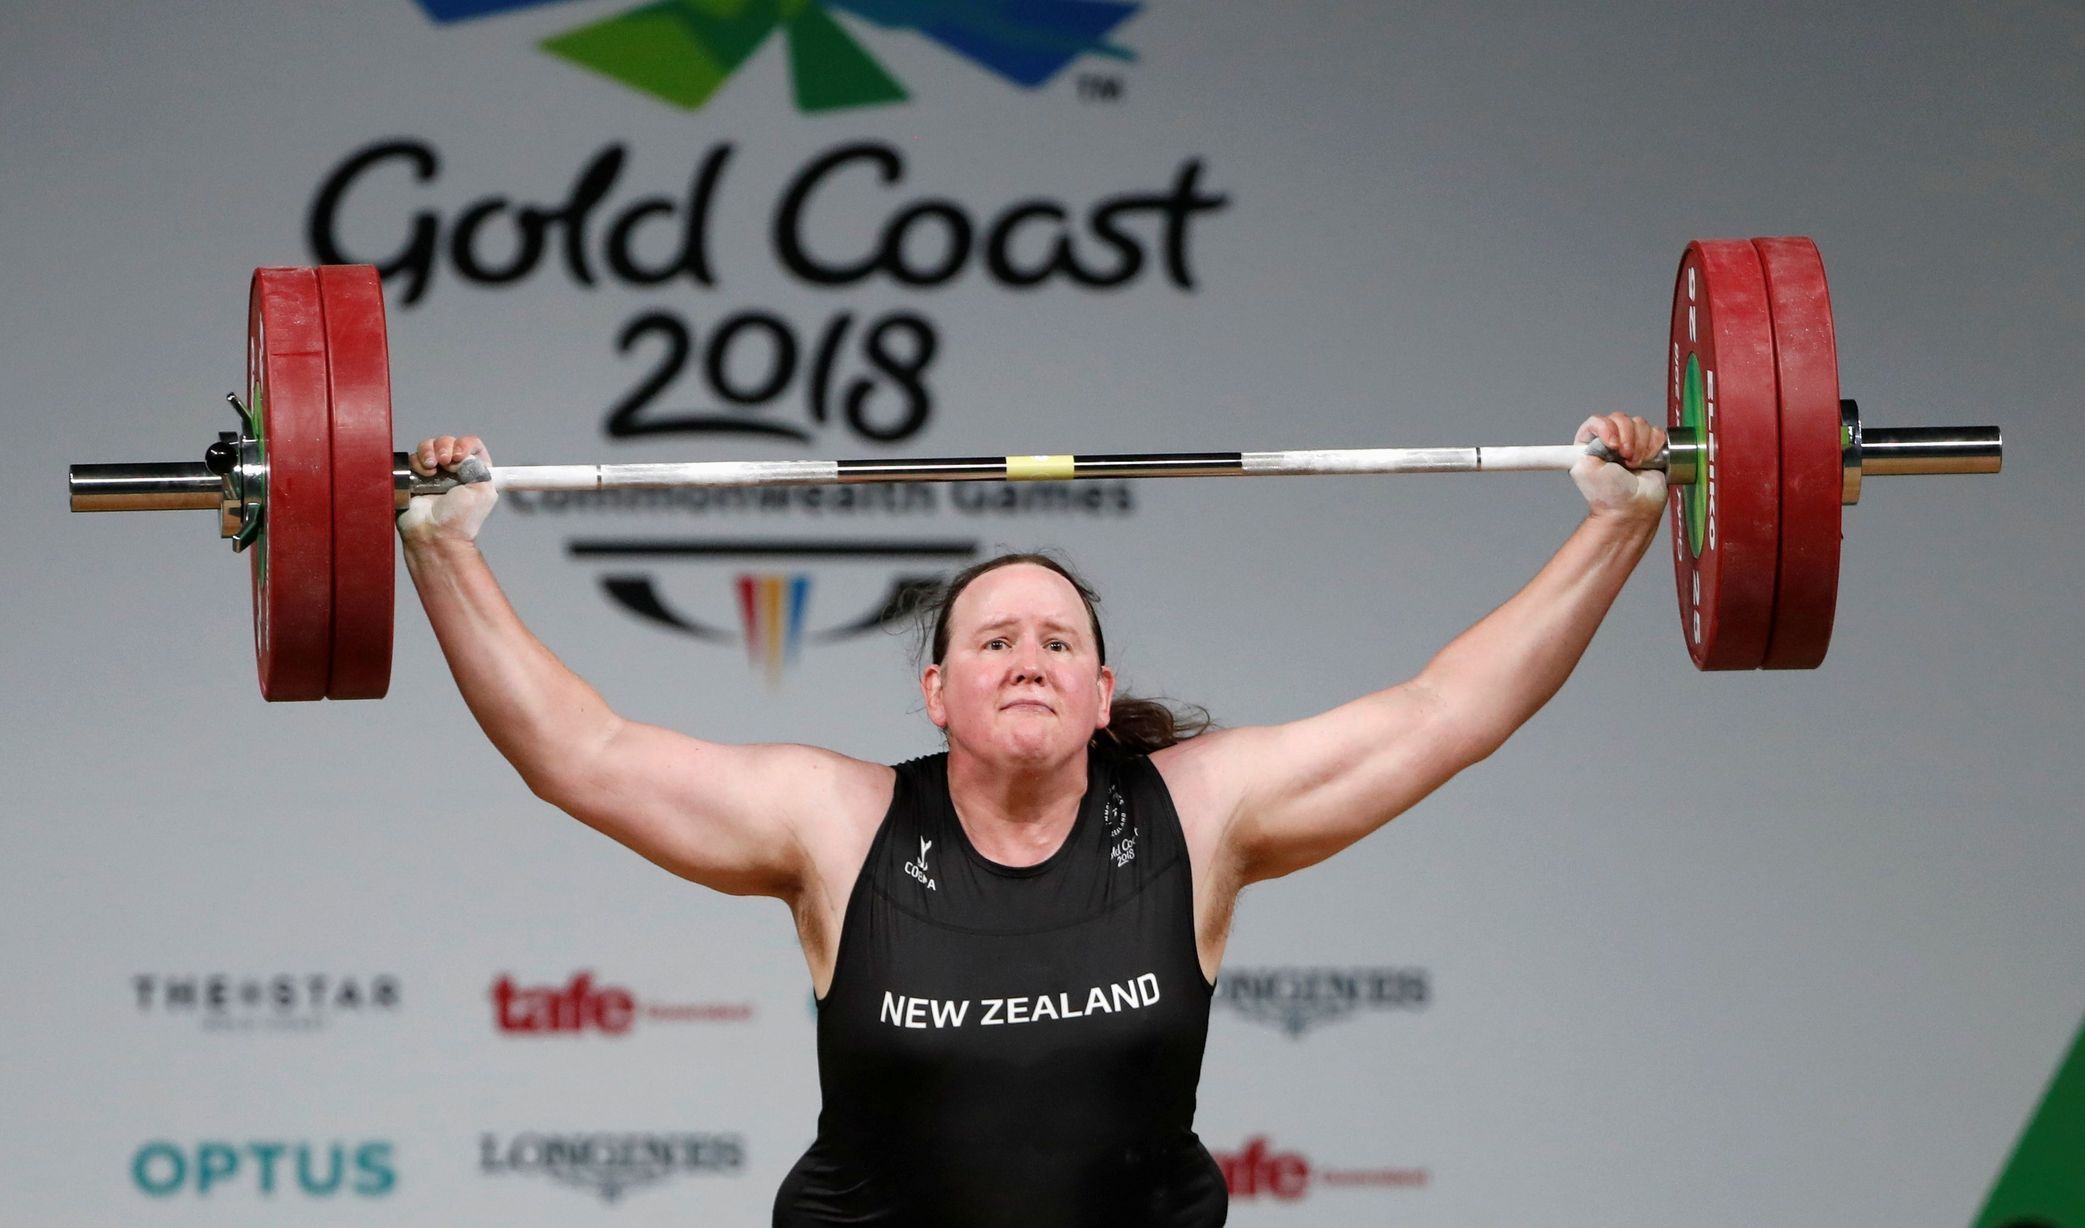 FILE PHOTO: Laurel Hubbard of New Zealand competes at Gold Coast 2018 Commonwealth Games